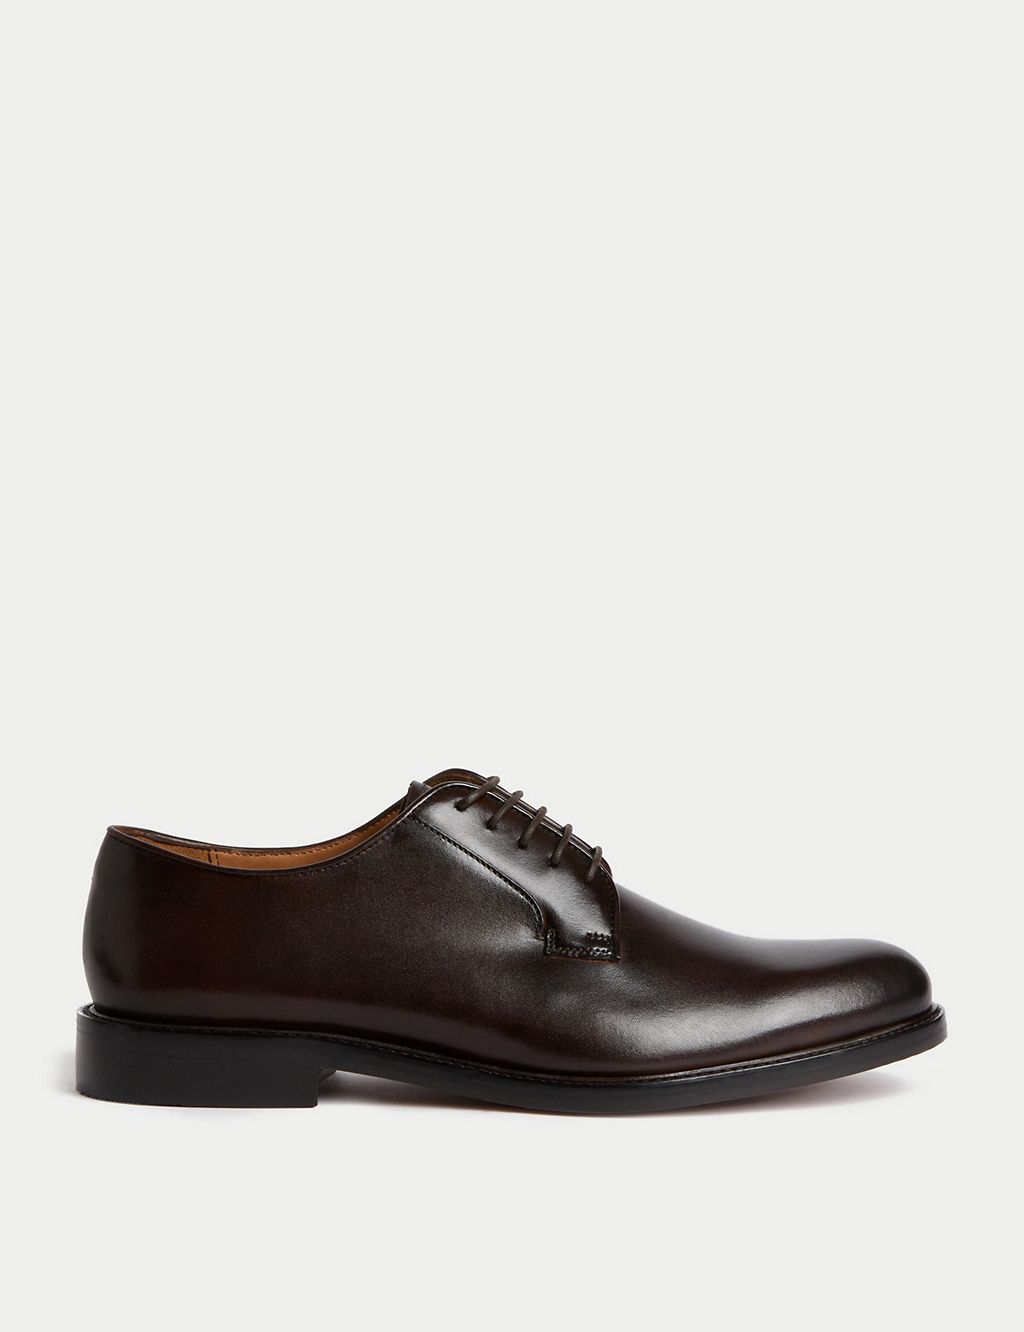 Leather Derby Shoes | M&S SARTORIAL | M&S